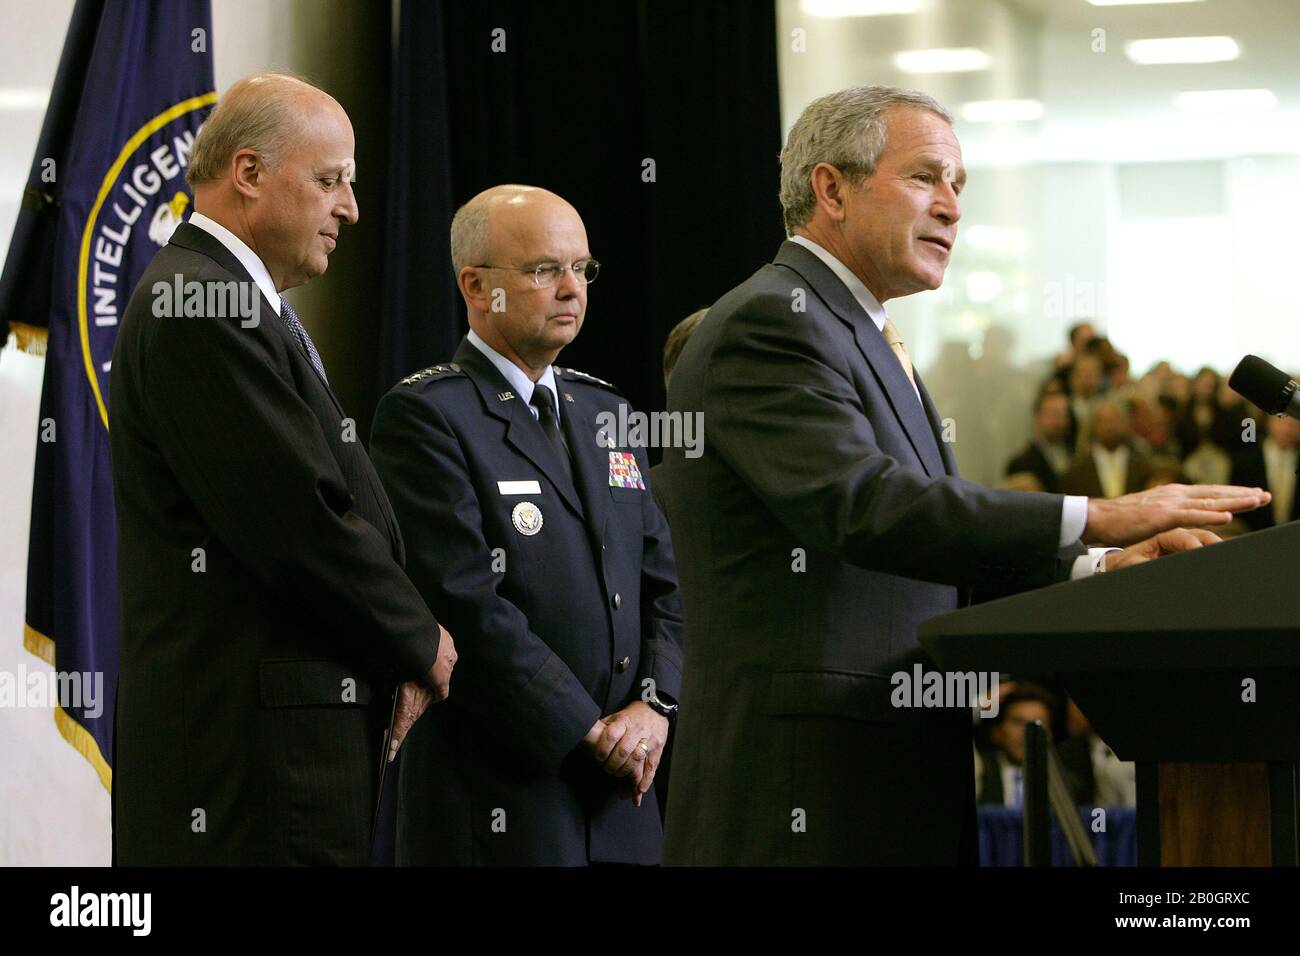 Langley, VA - May 31, 2006 -- United States President George W. Bush, right, speaks during a ceremonial swearing in for new Central Intelligence Agency Director General Michael Hayden, Center, as National Intelligence Director John Negroponte looks on, at CIA headquarters in Langley, Virginia Wednesday 31 May 2006. Hayden, the former head of the super-secret National Security Agency (NSA), was officially sworn-in yesterday in a closed ceremony.Credit: Matthew Cavanaugh-Pool via CNP / MediaPunch Stock Photo